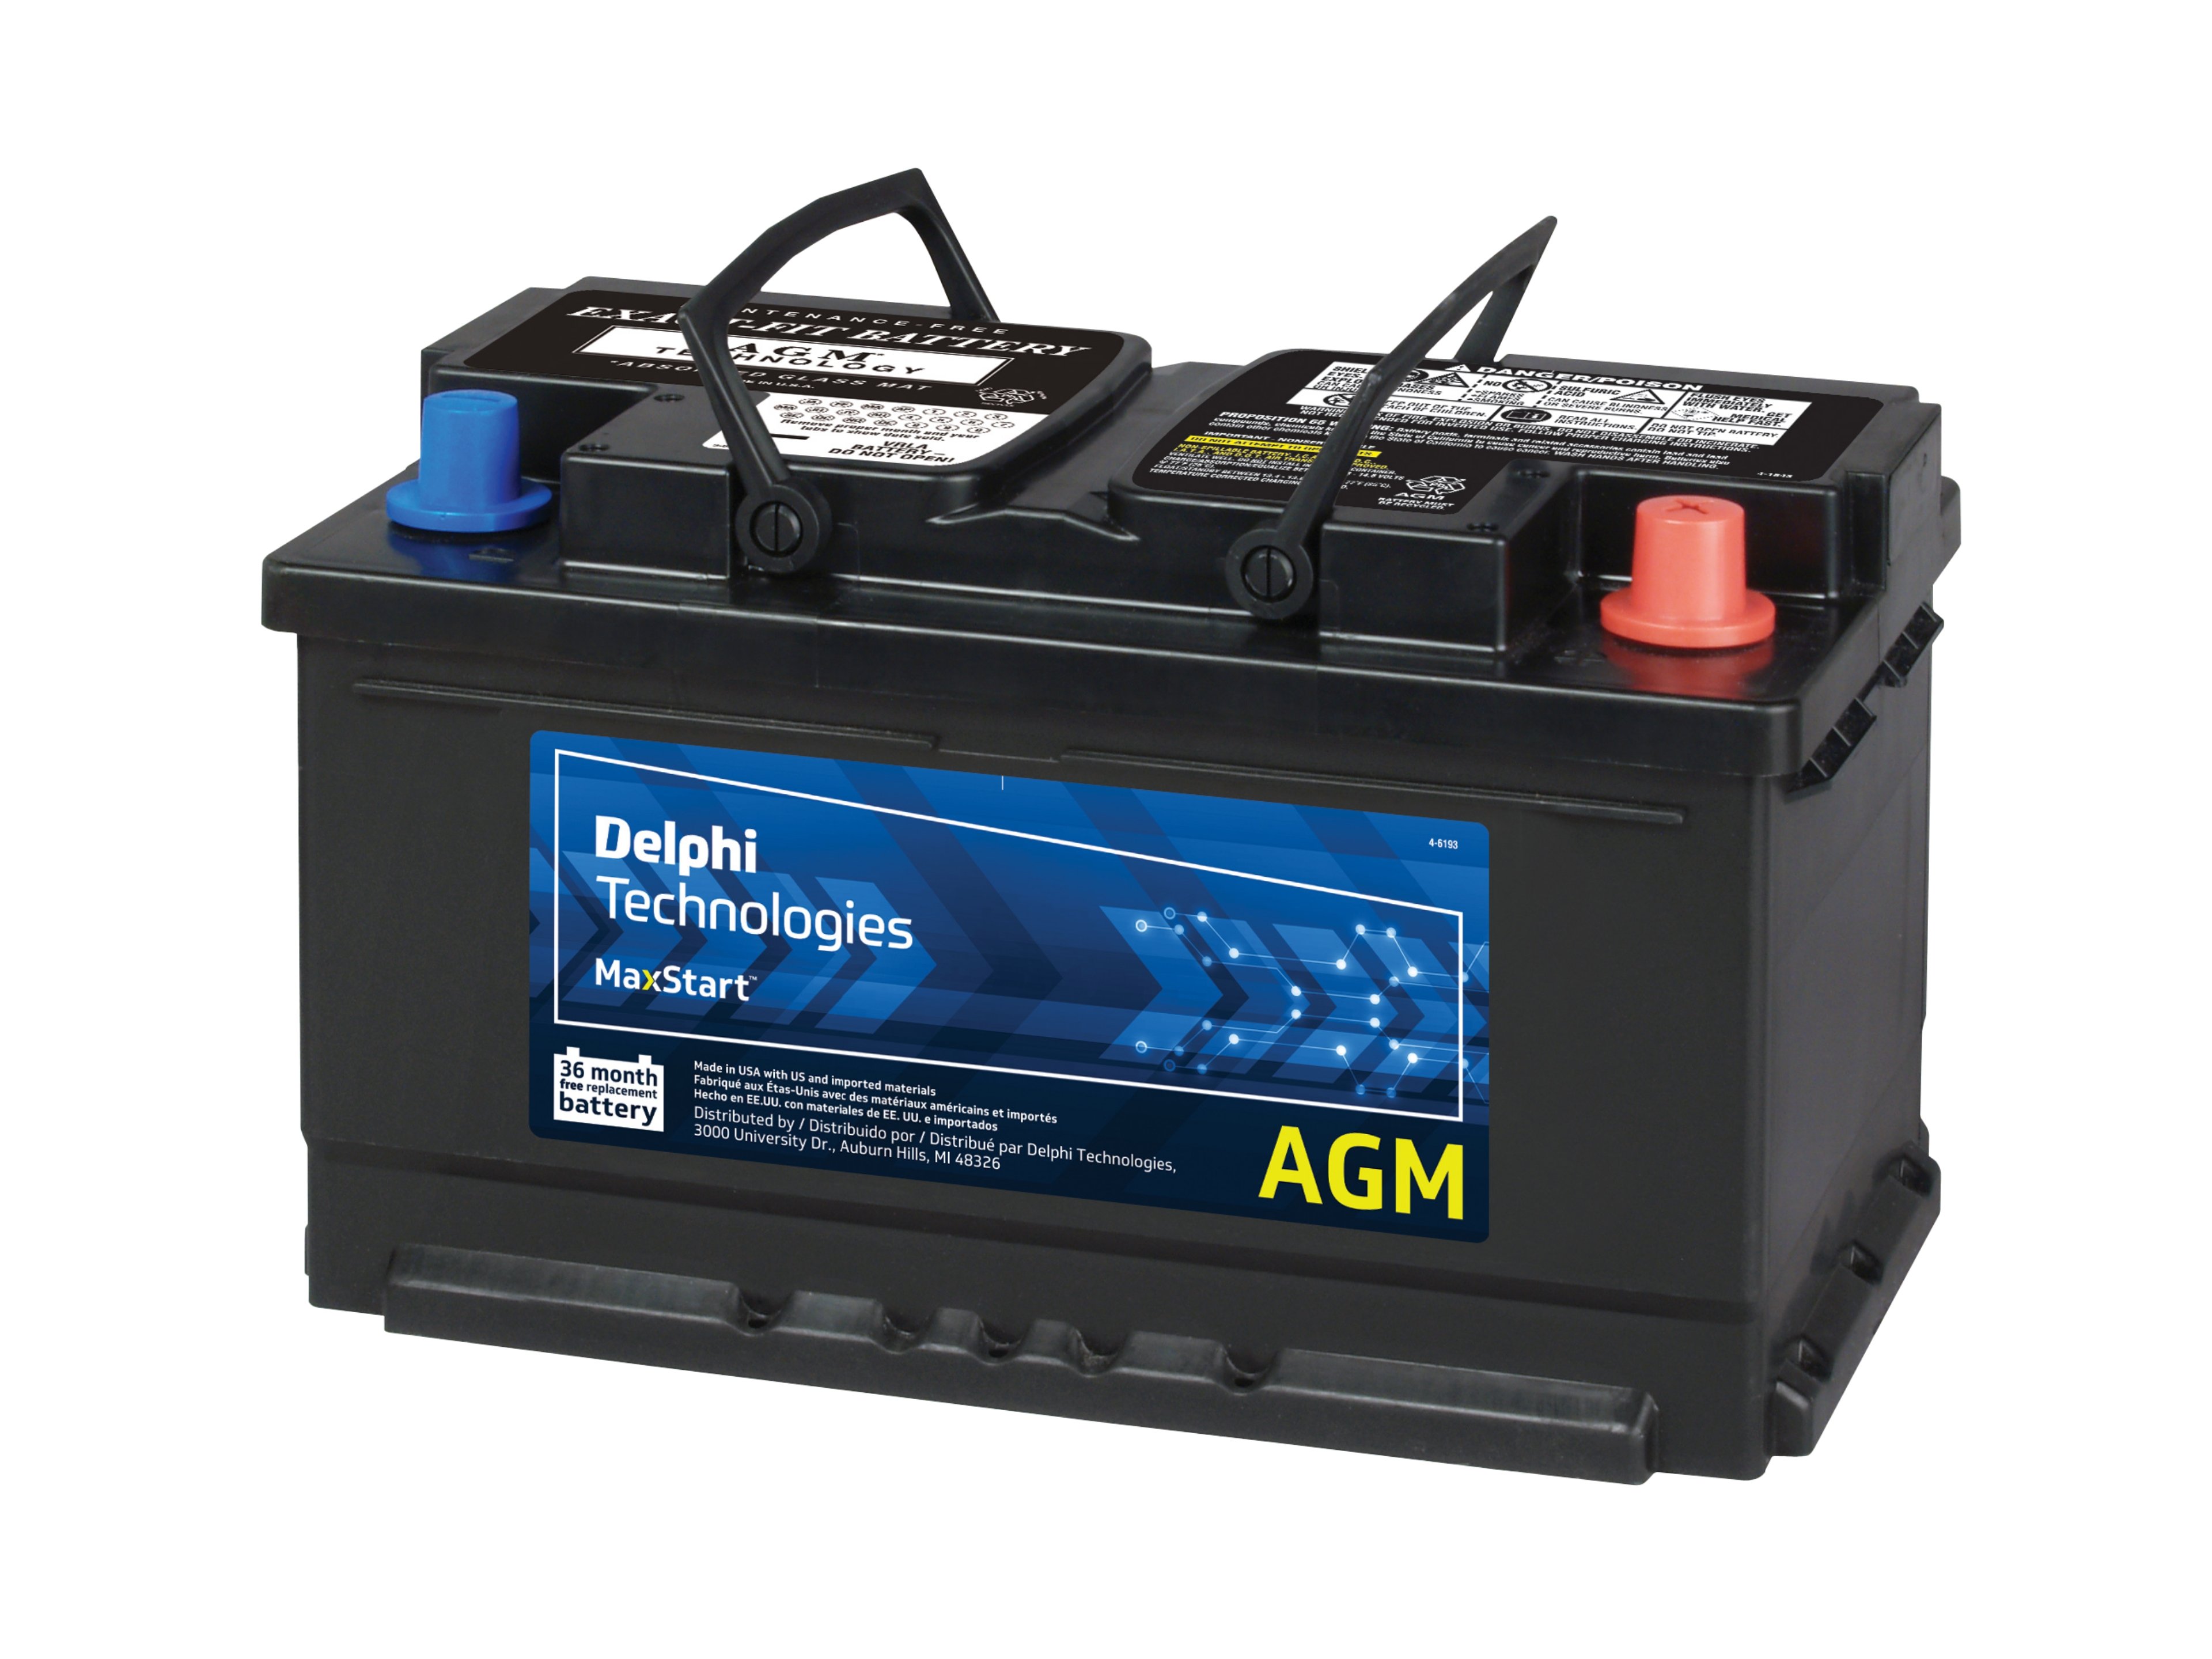 Battery Master Fit  Charge your motorhome vehicle battery from the leisure  battery - automatically! 